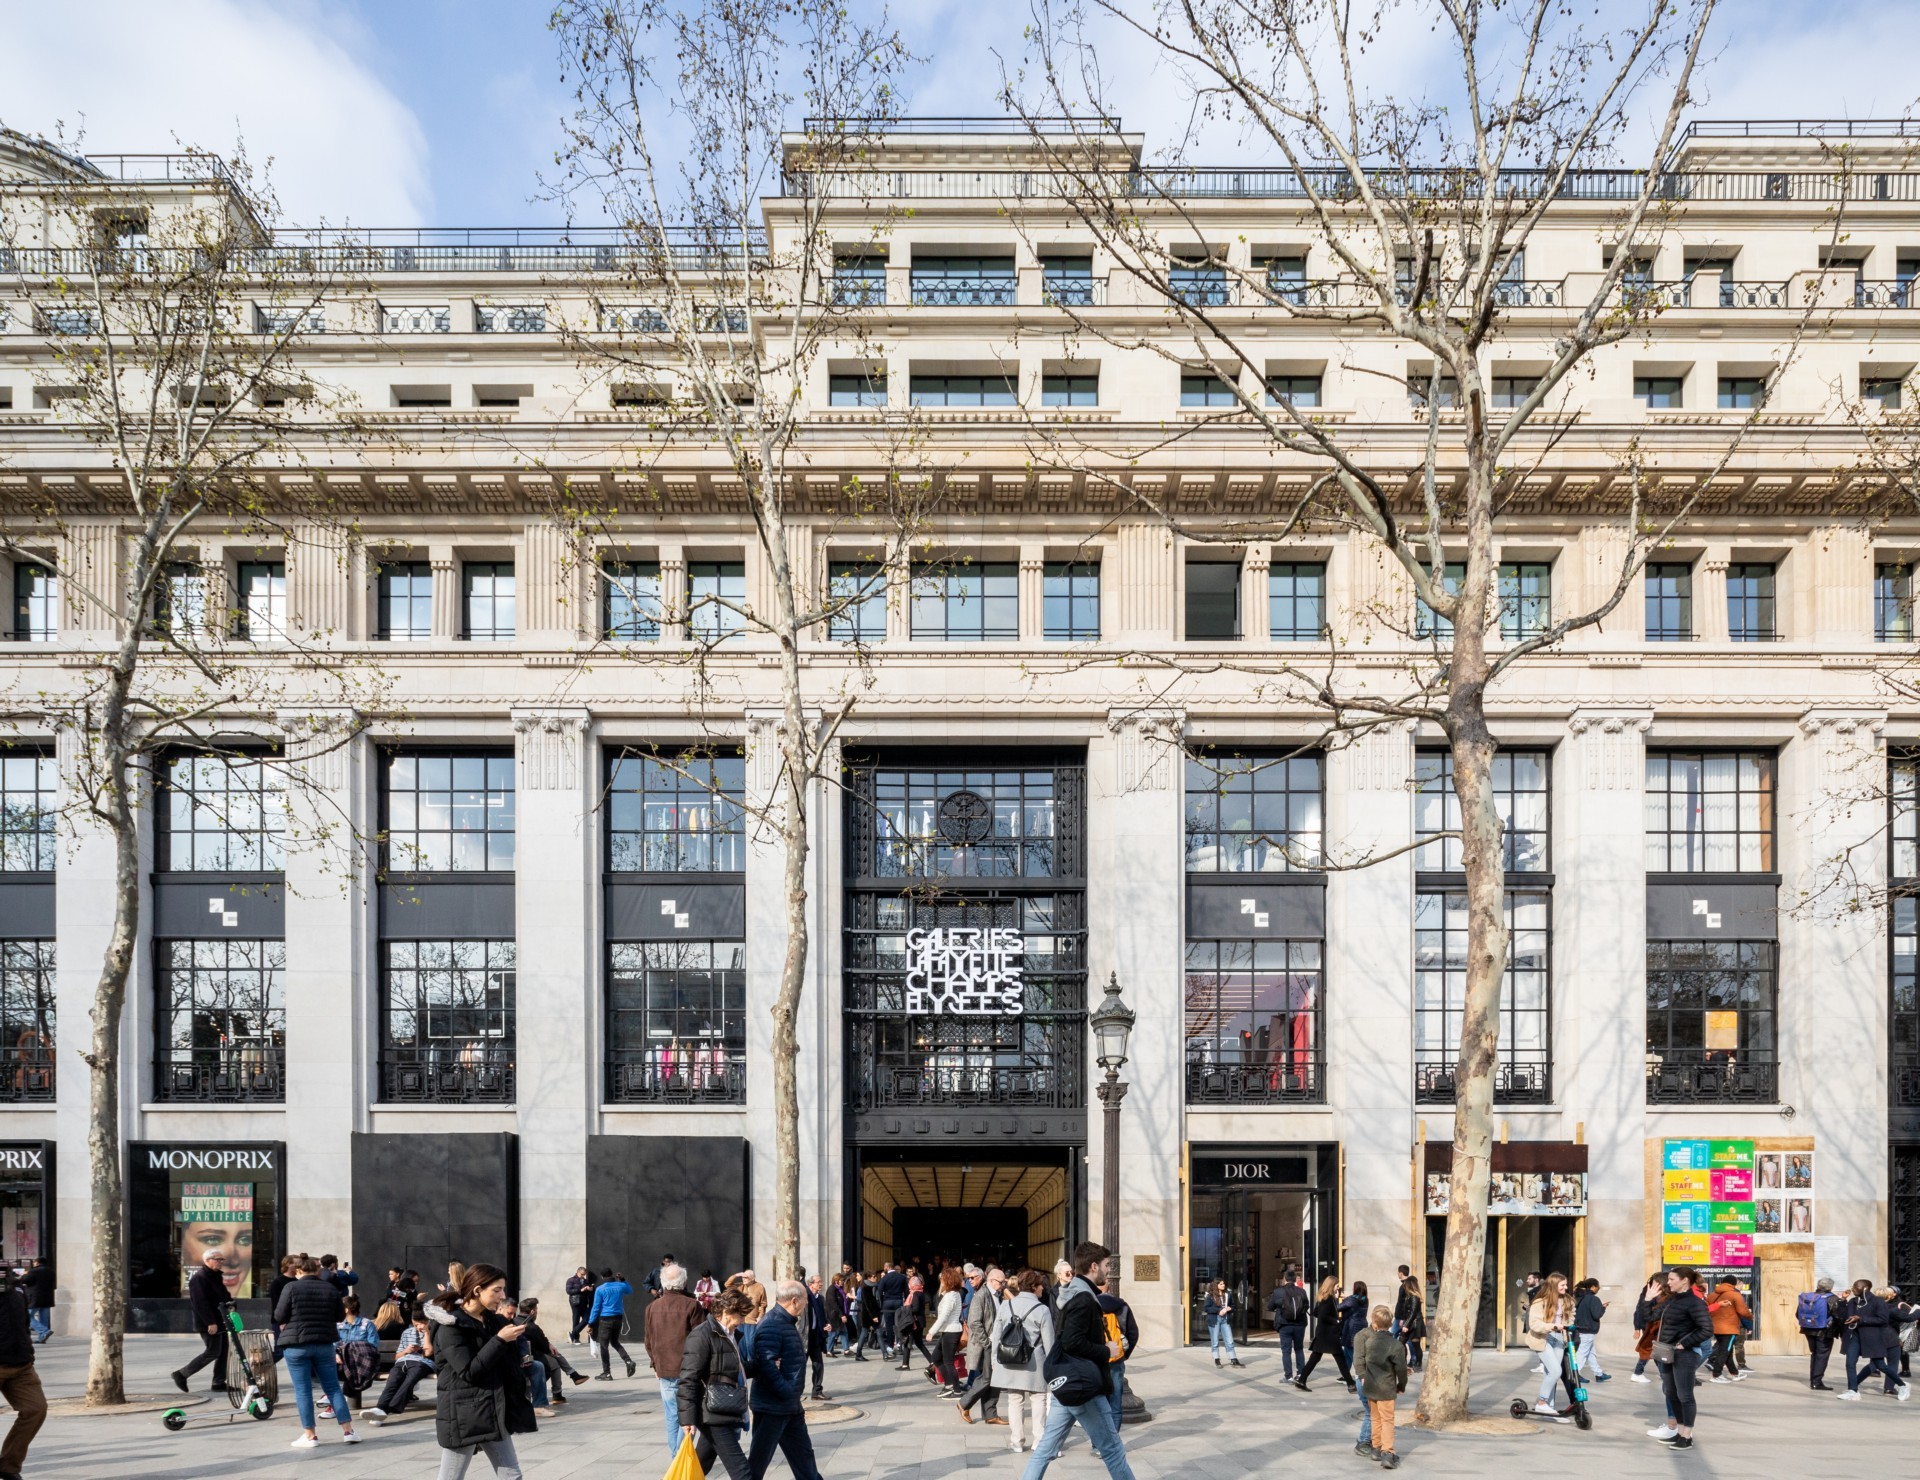 chanel takes over galeries lafayette champs elysees